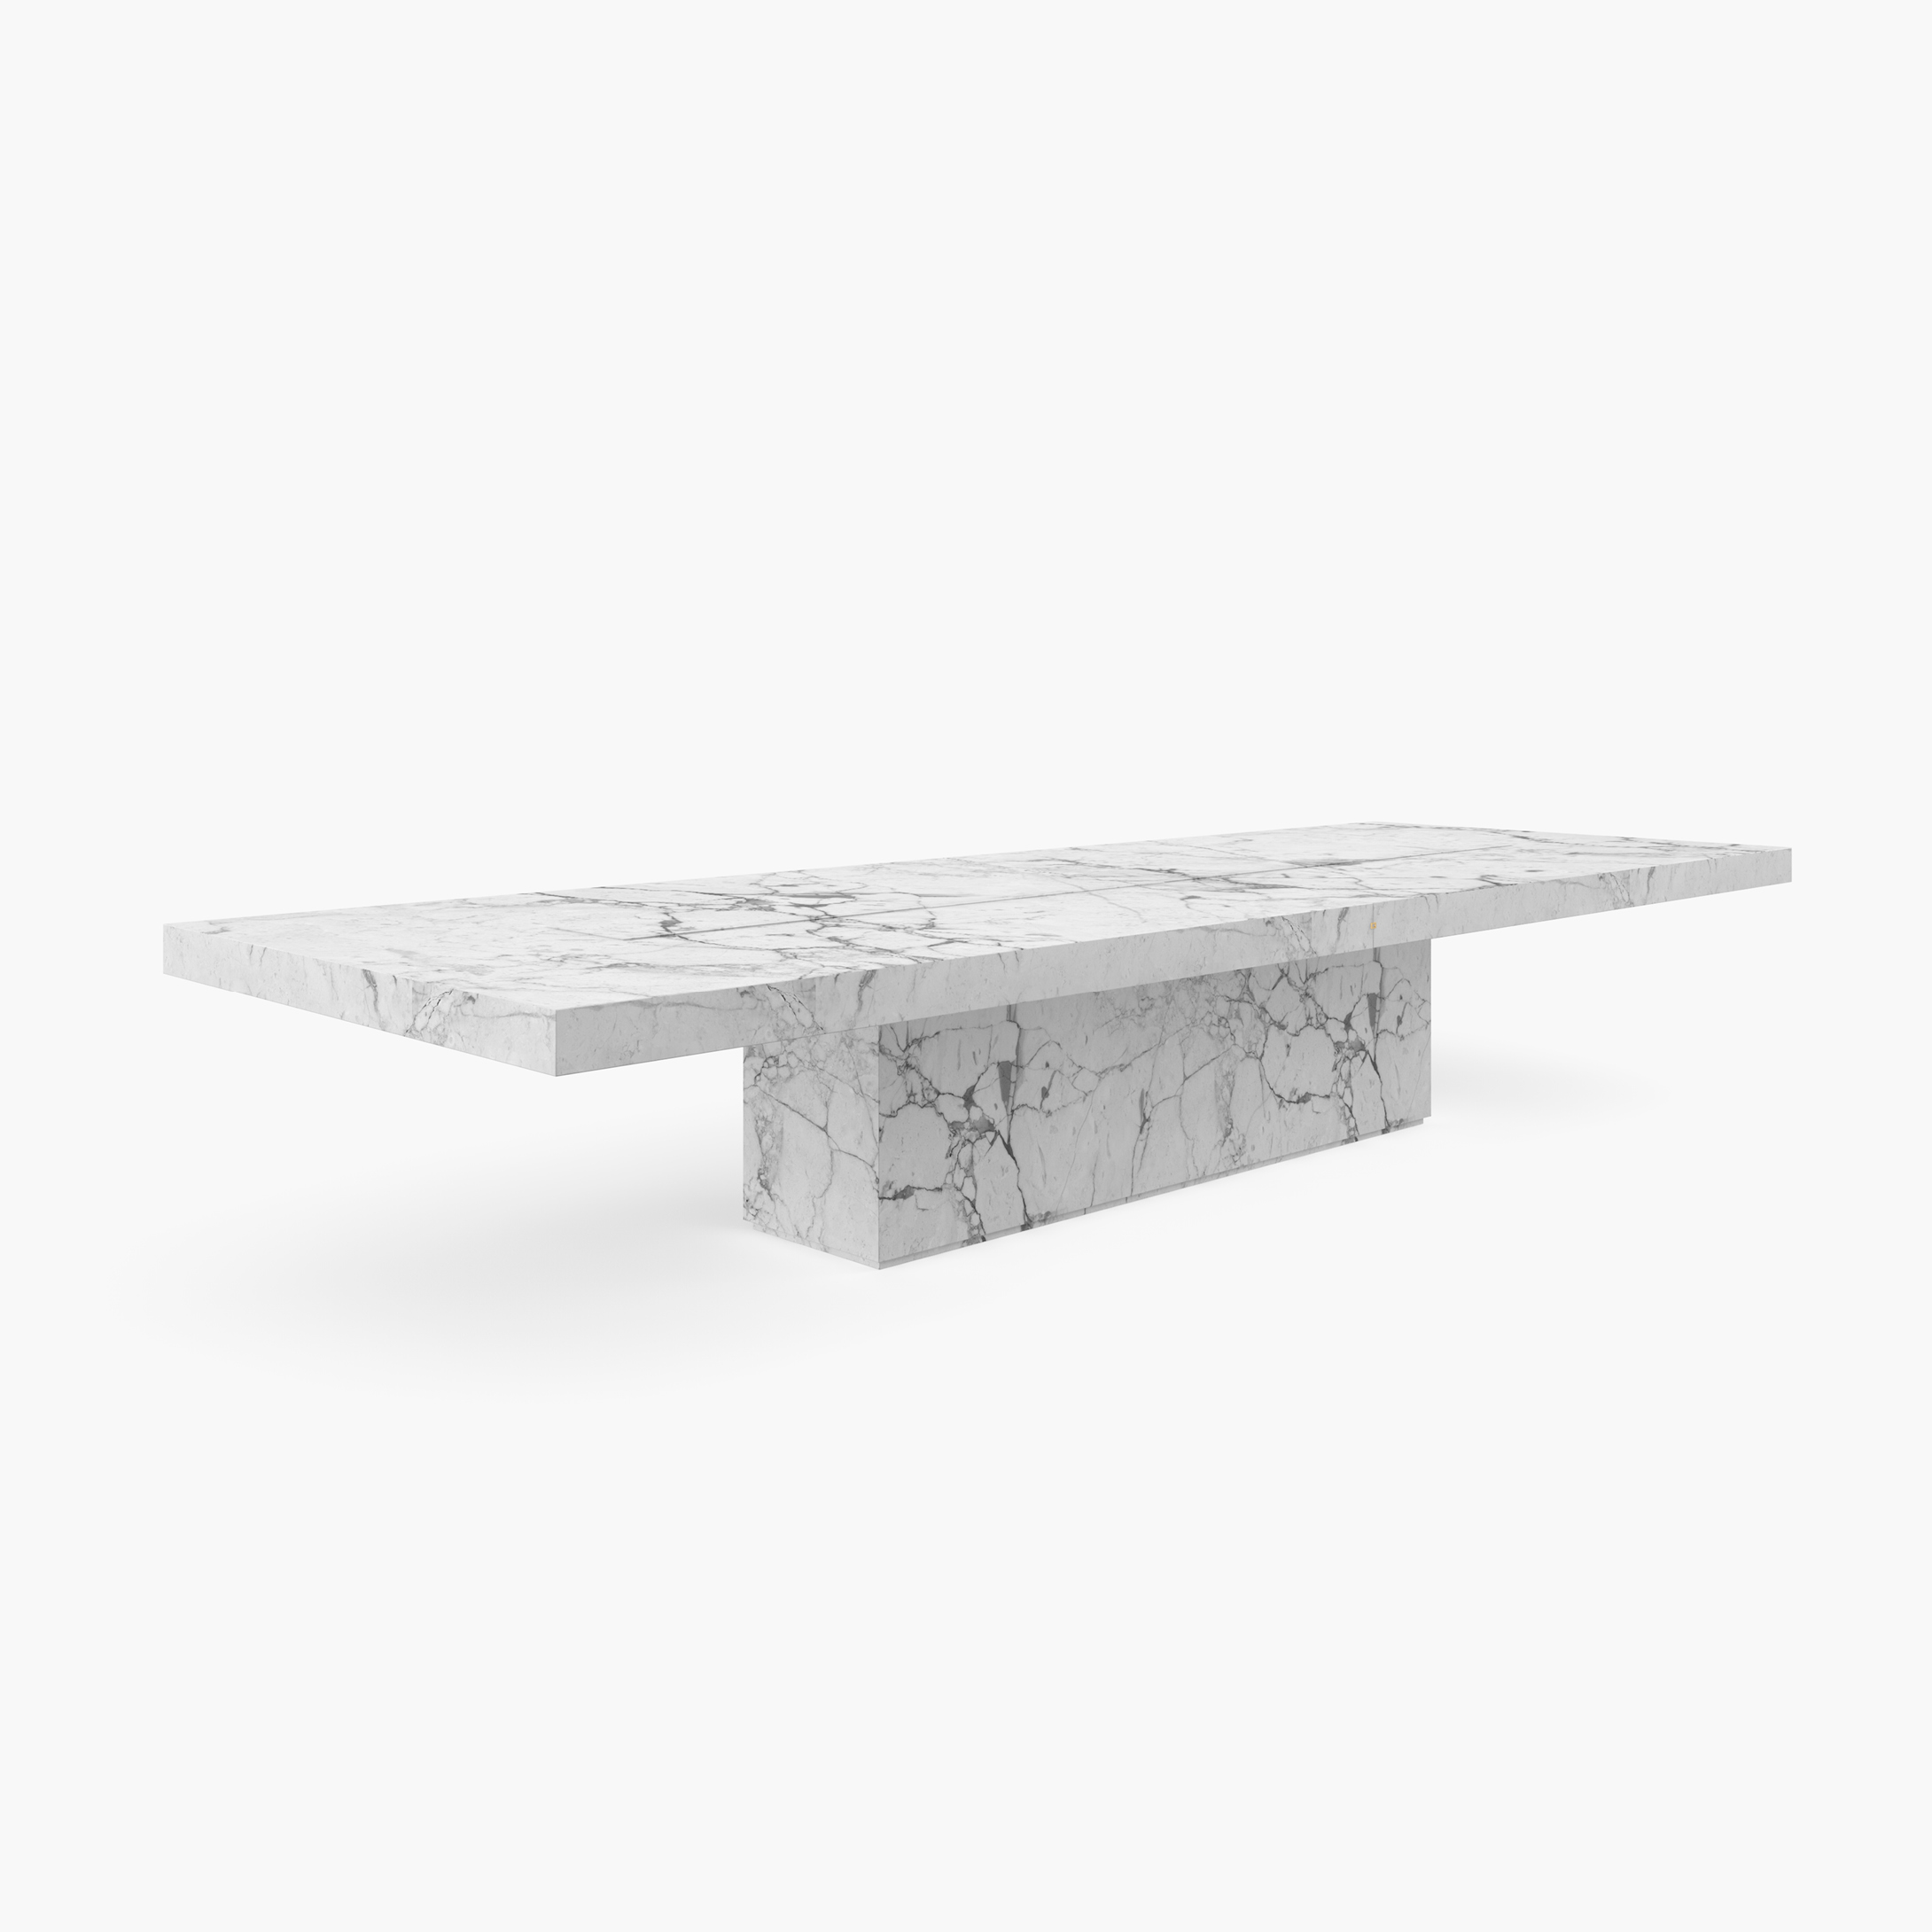 ConferenceTable large Block base White Arabescato Marble limited edition Conference Room creation ConferenceTables FS 416 FELIX SCHWAKE